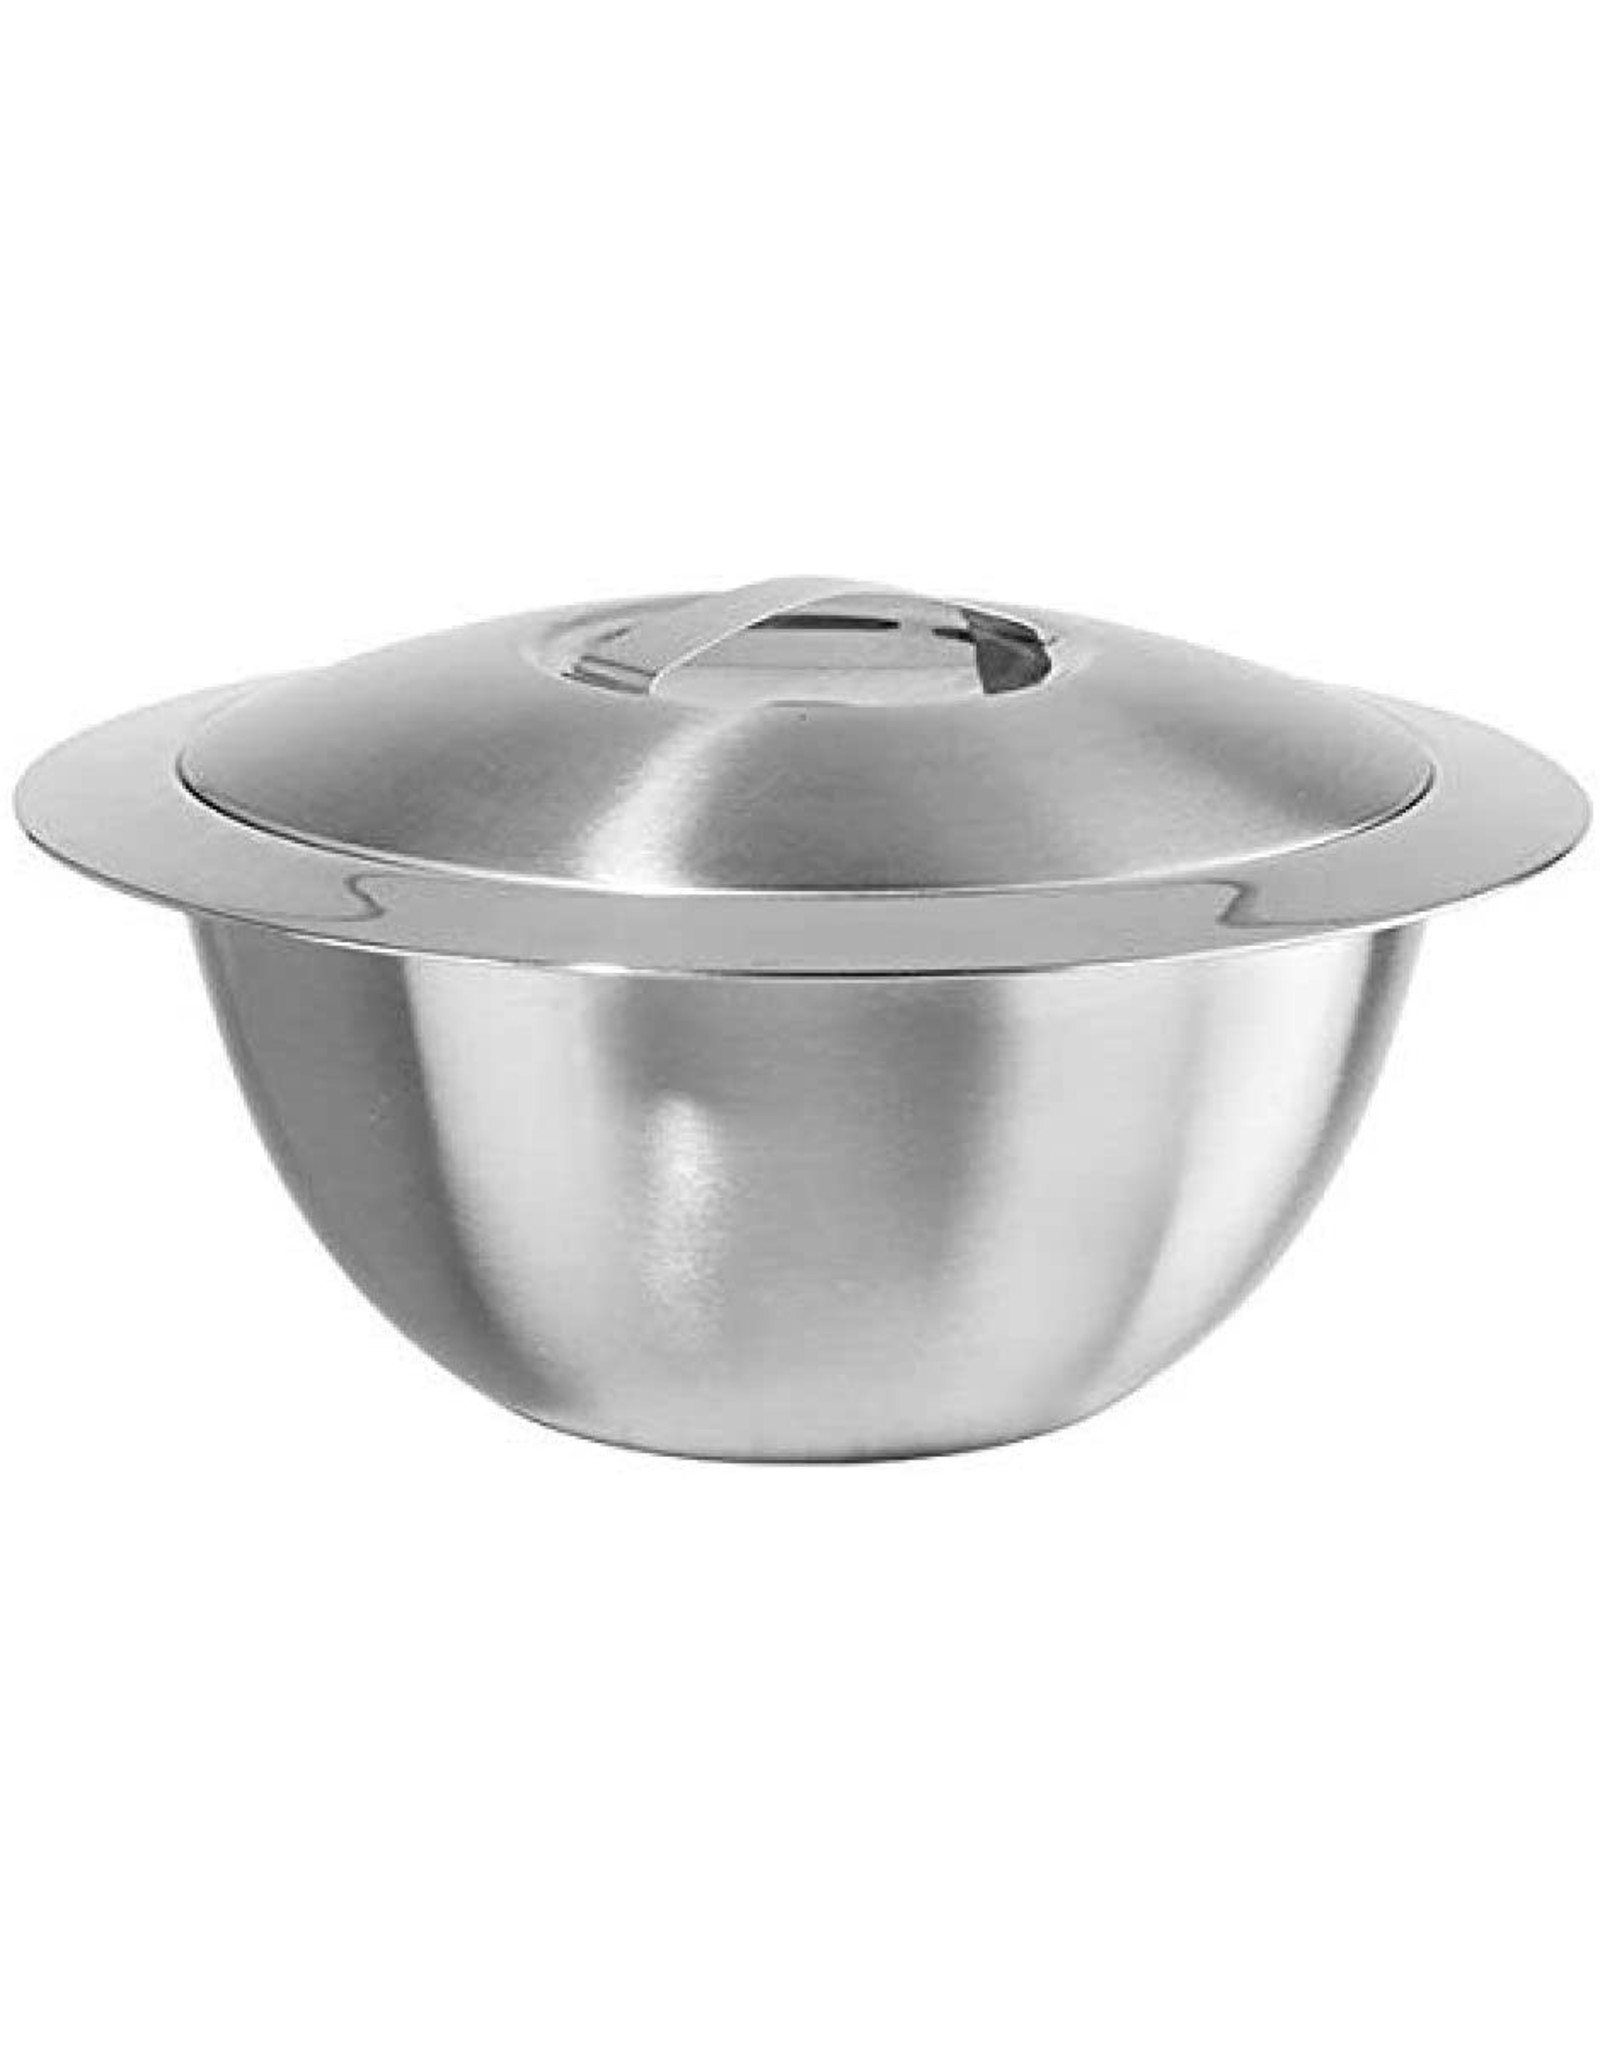 https://cdn.shoplightspeed.com/shops/635781/files/26538443/1600x2048x2/double-wall-insulated-hot-cold-serving-bowl-with-l.jpg